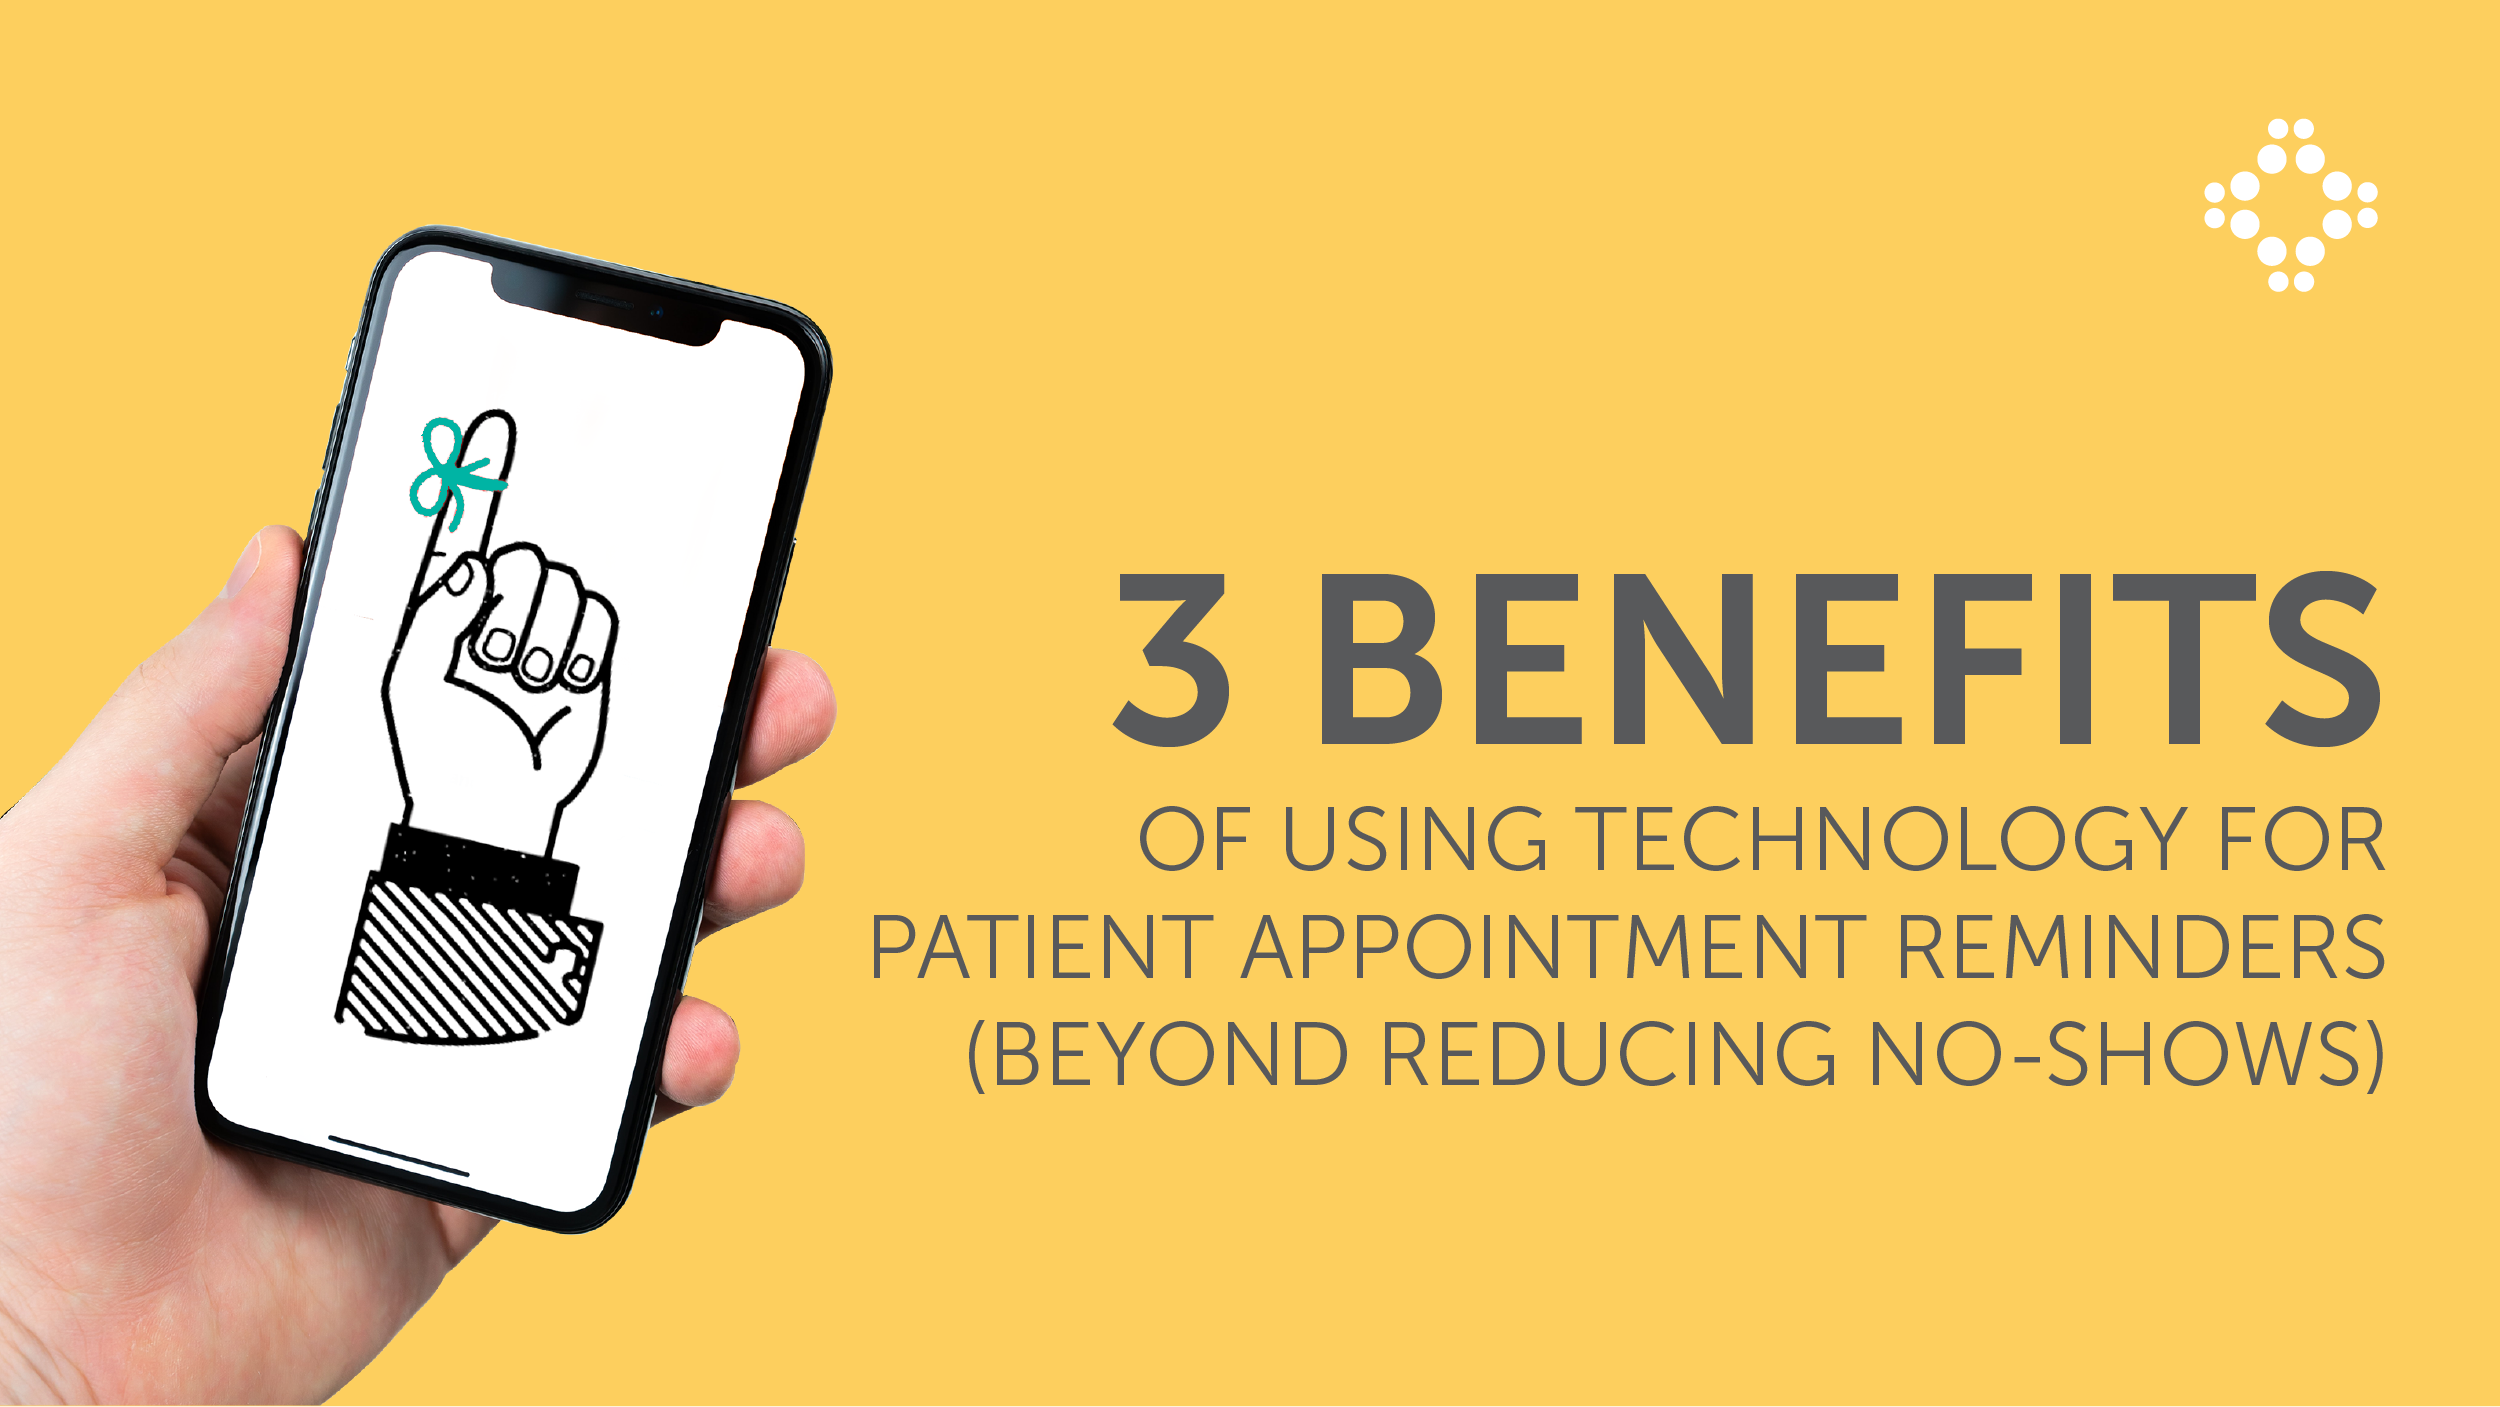 3 Benefits of Using Technology for Patient Appointment Reminders Beyond Reducing No-Shows